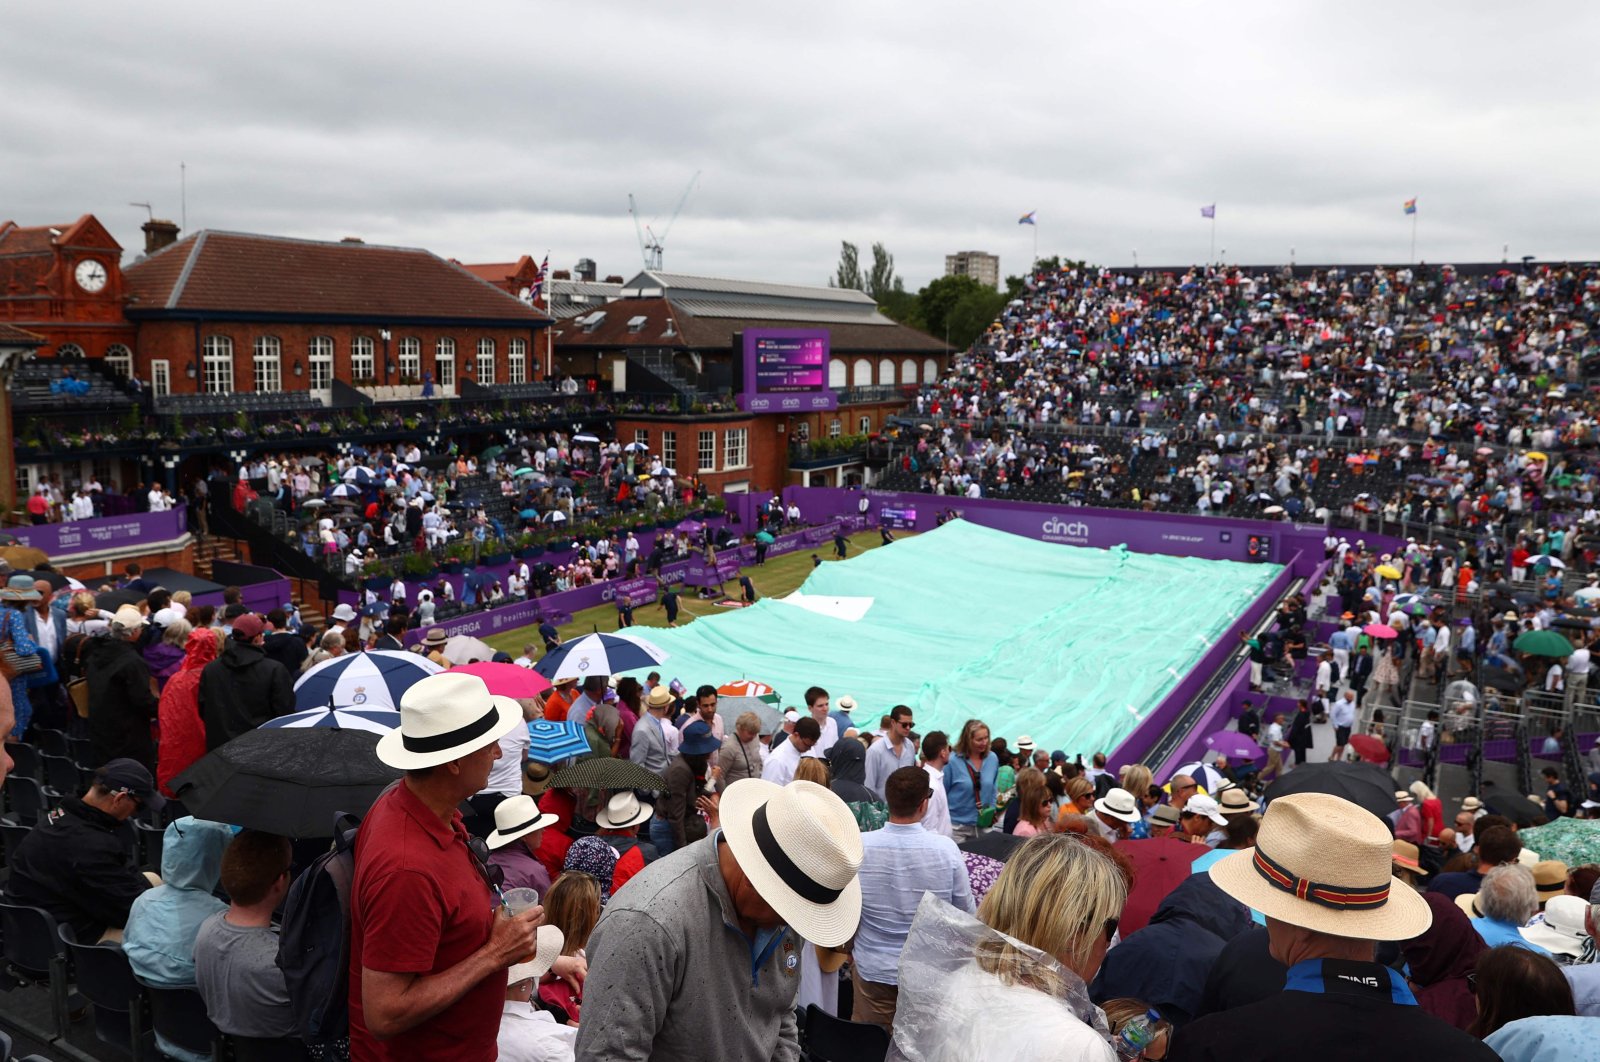 Spectators start to leave and the covers are pulled over the court as rain returns to disrupt the men&#039;s singles semifinal tennis match between Matteo Berrettini and Botic van de Zandschulp on Day 6 of the cinch ATP Championships at Queen&#039;s Club, west London, U.K., June 18, 2022. (AFP Photo)